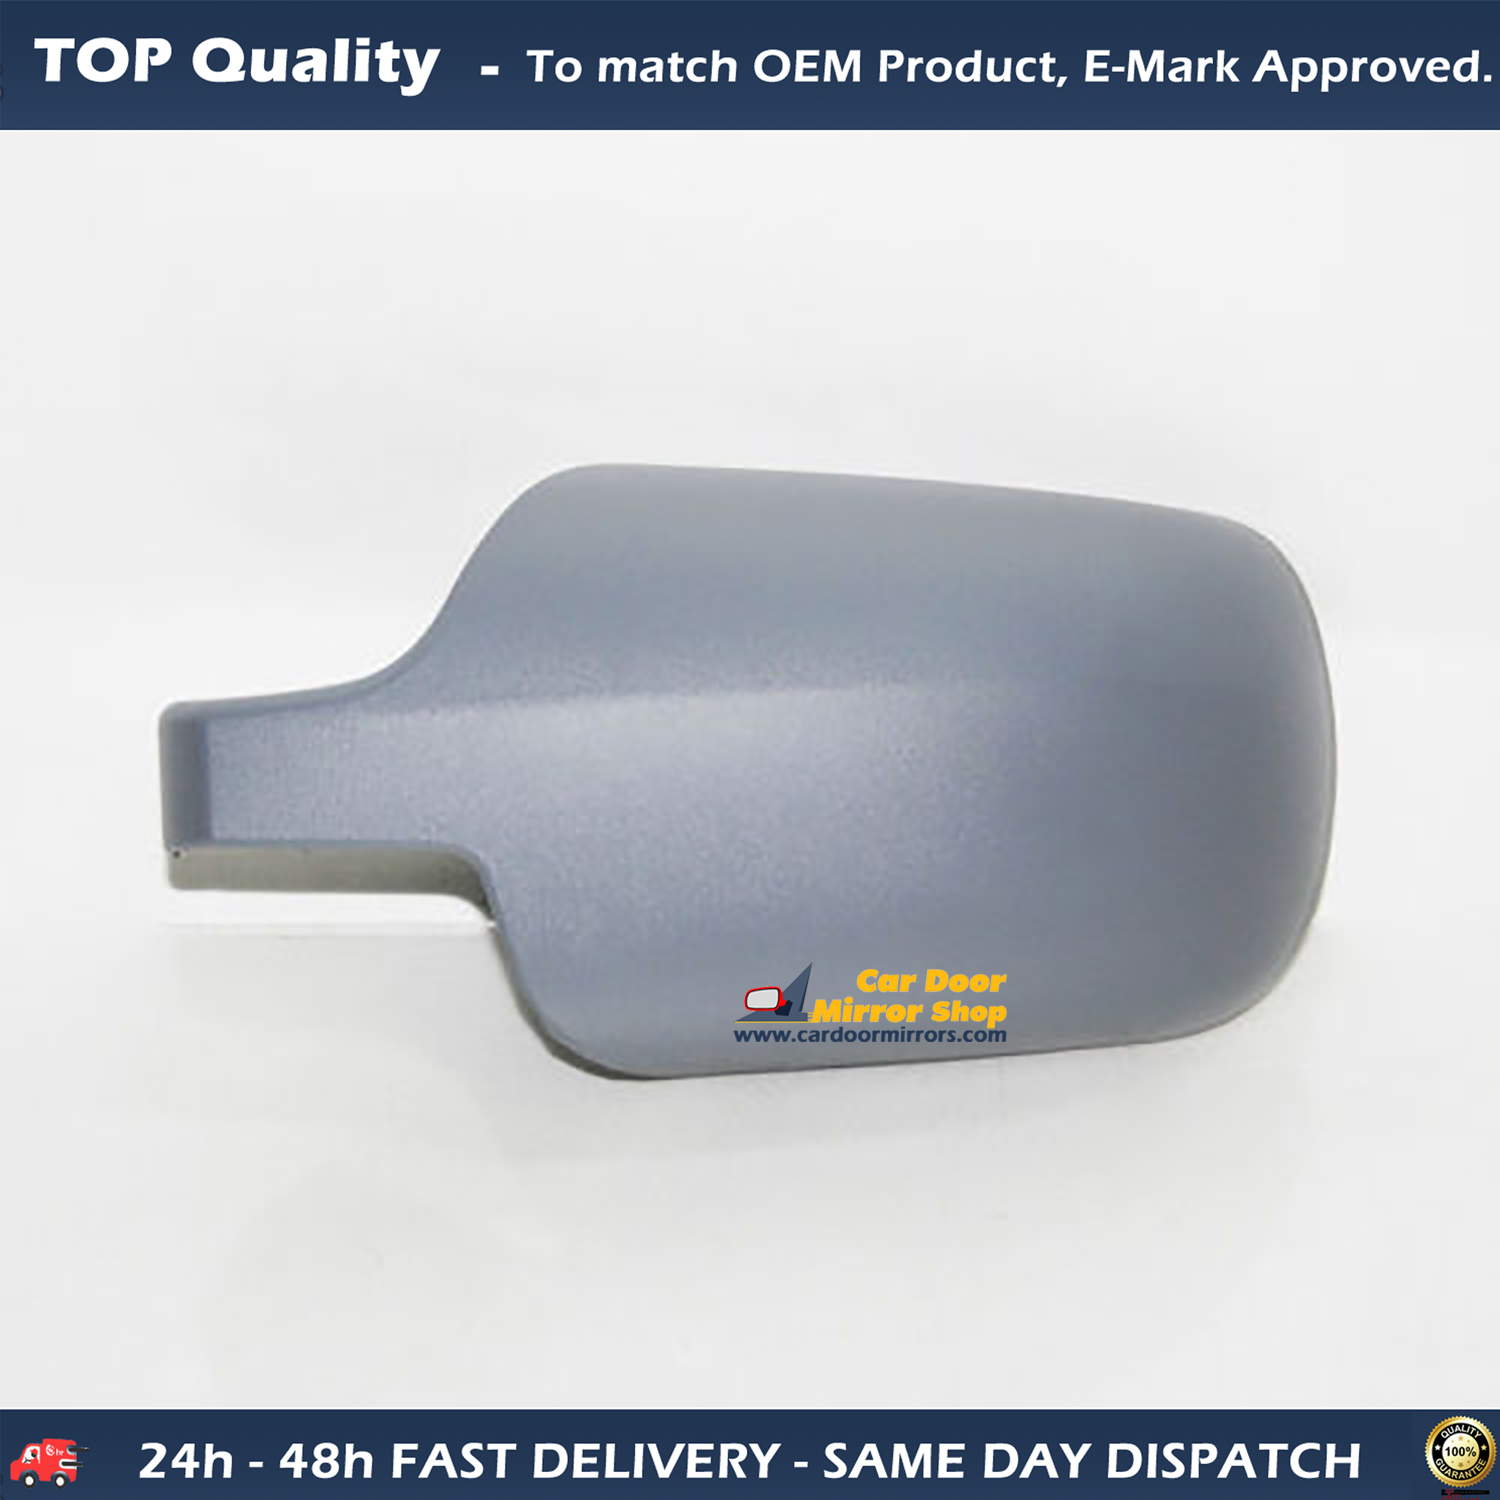 Ford Fiesta Wing Mirror Cover LEFT HAND ( UK Passenger Side ) 2001 to 2008 – Wing Mirror Cover ( Primed )